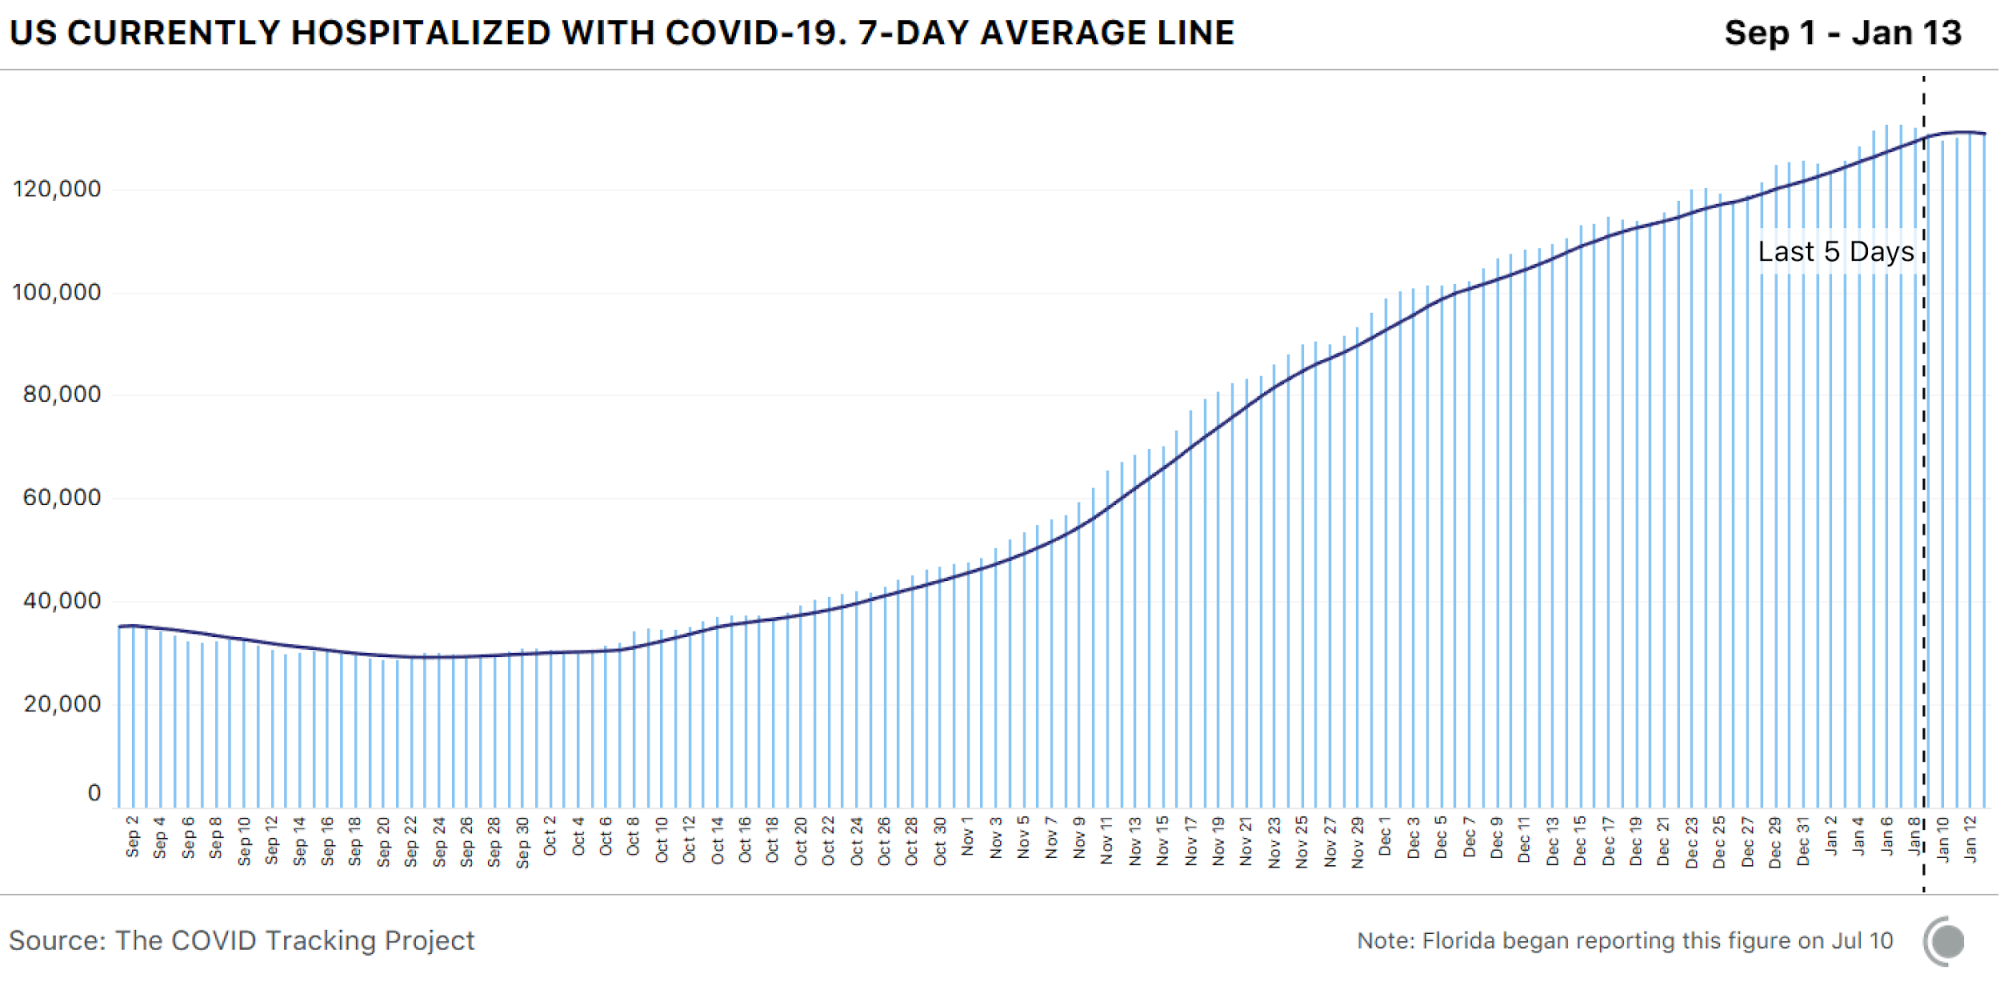 Bar chart showing currently hospitalized in the US with COVID-19 by day with 7-day average line. Over the past 5 days, hospitalizations have hit a plateau after months of consistent growth.